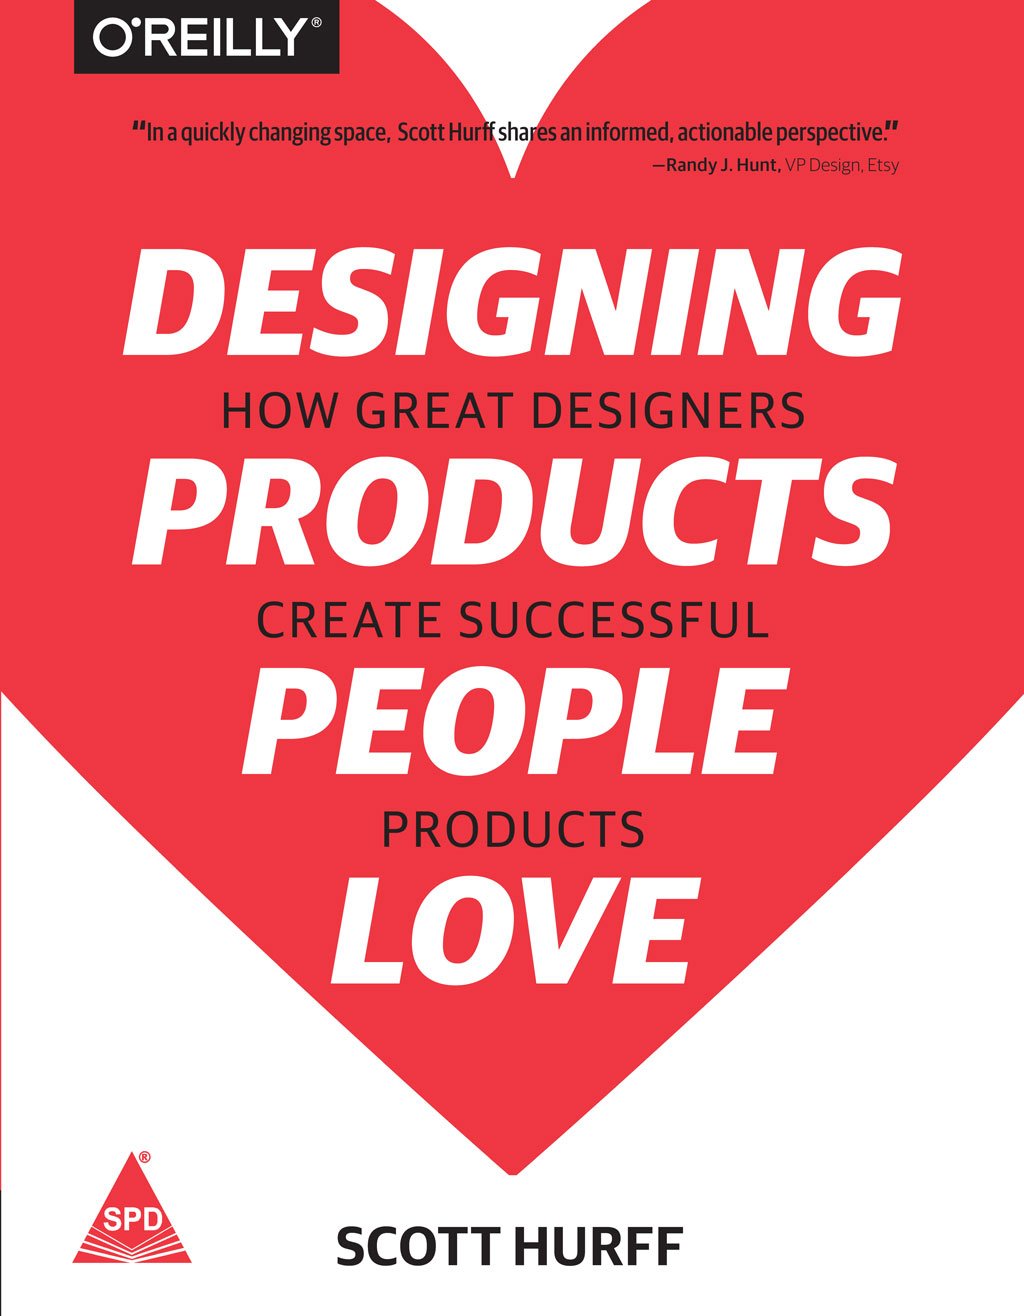 Designing Products People Love: How Great Designers Create Successful Products